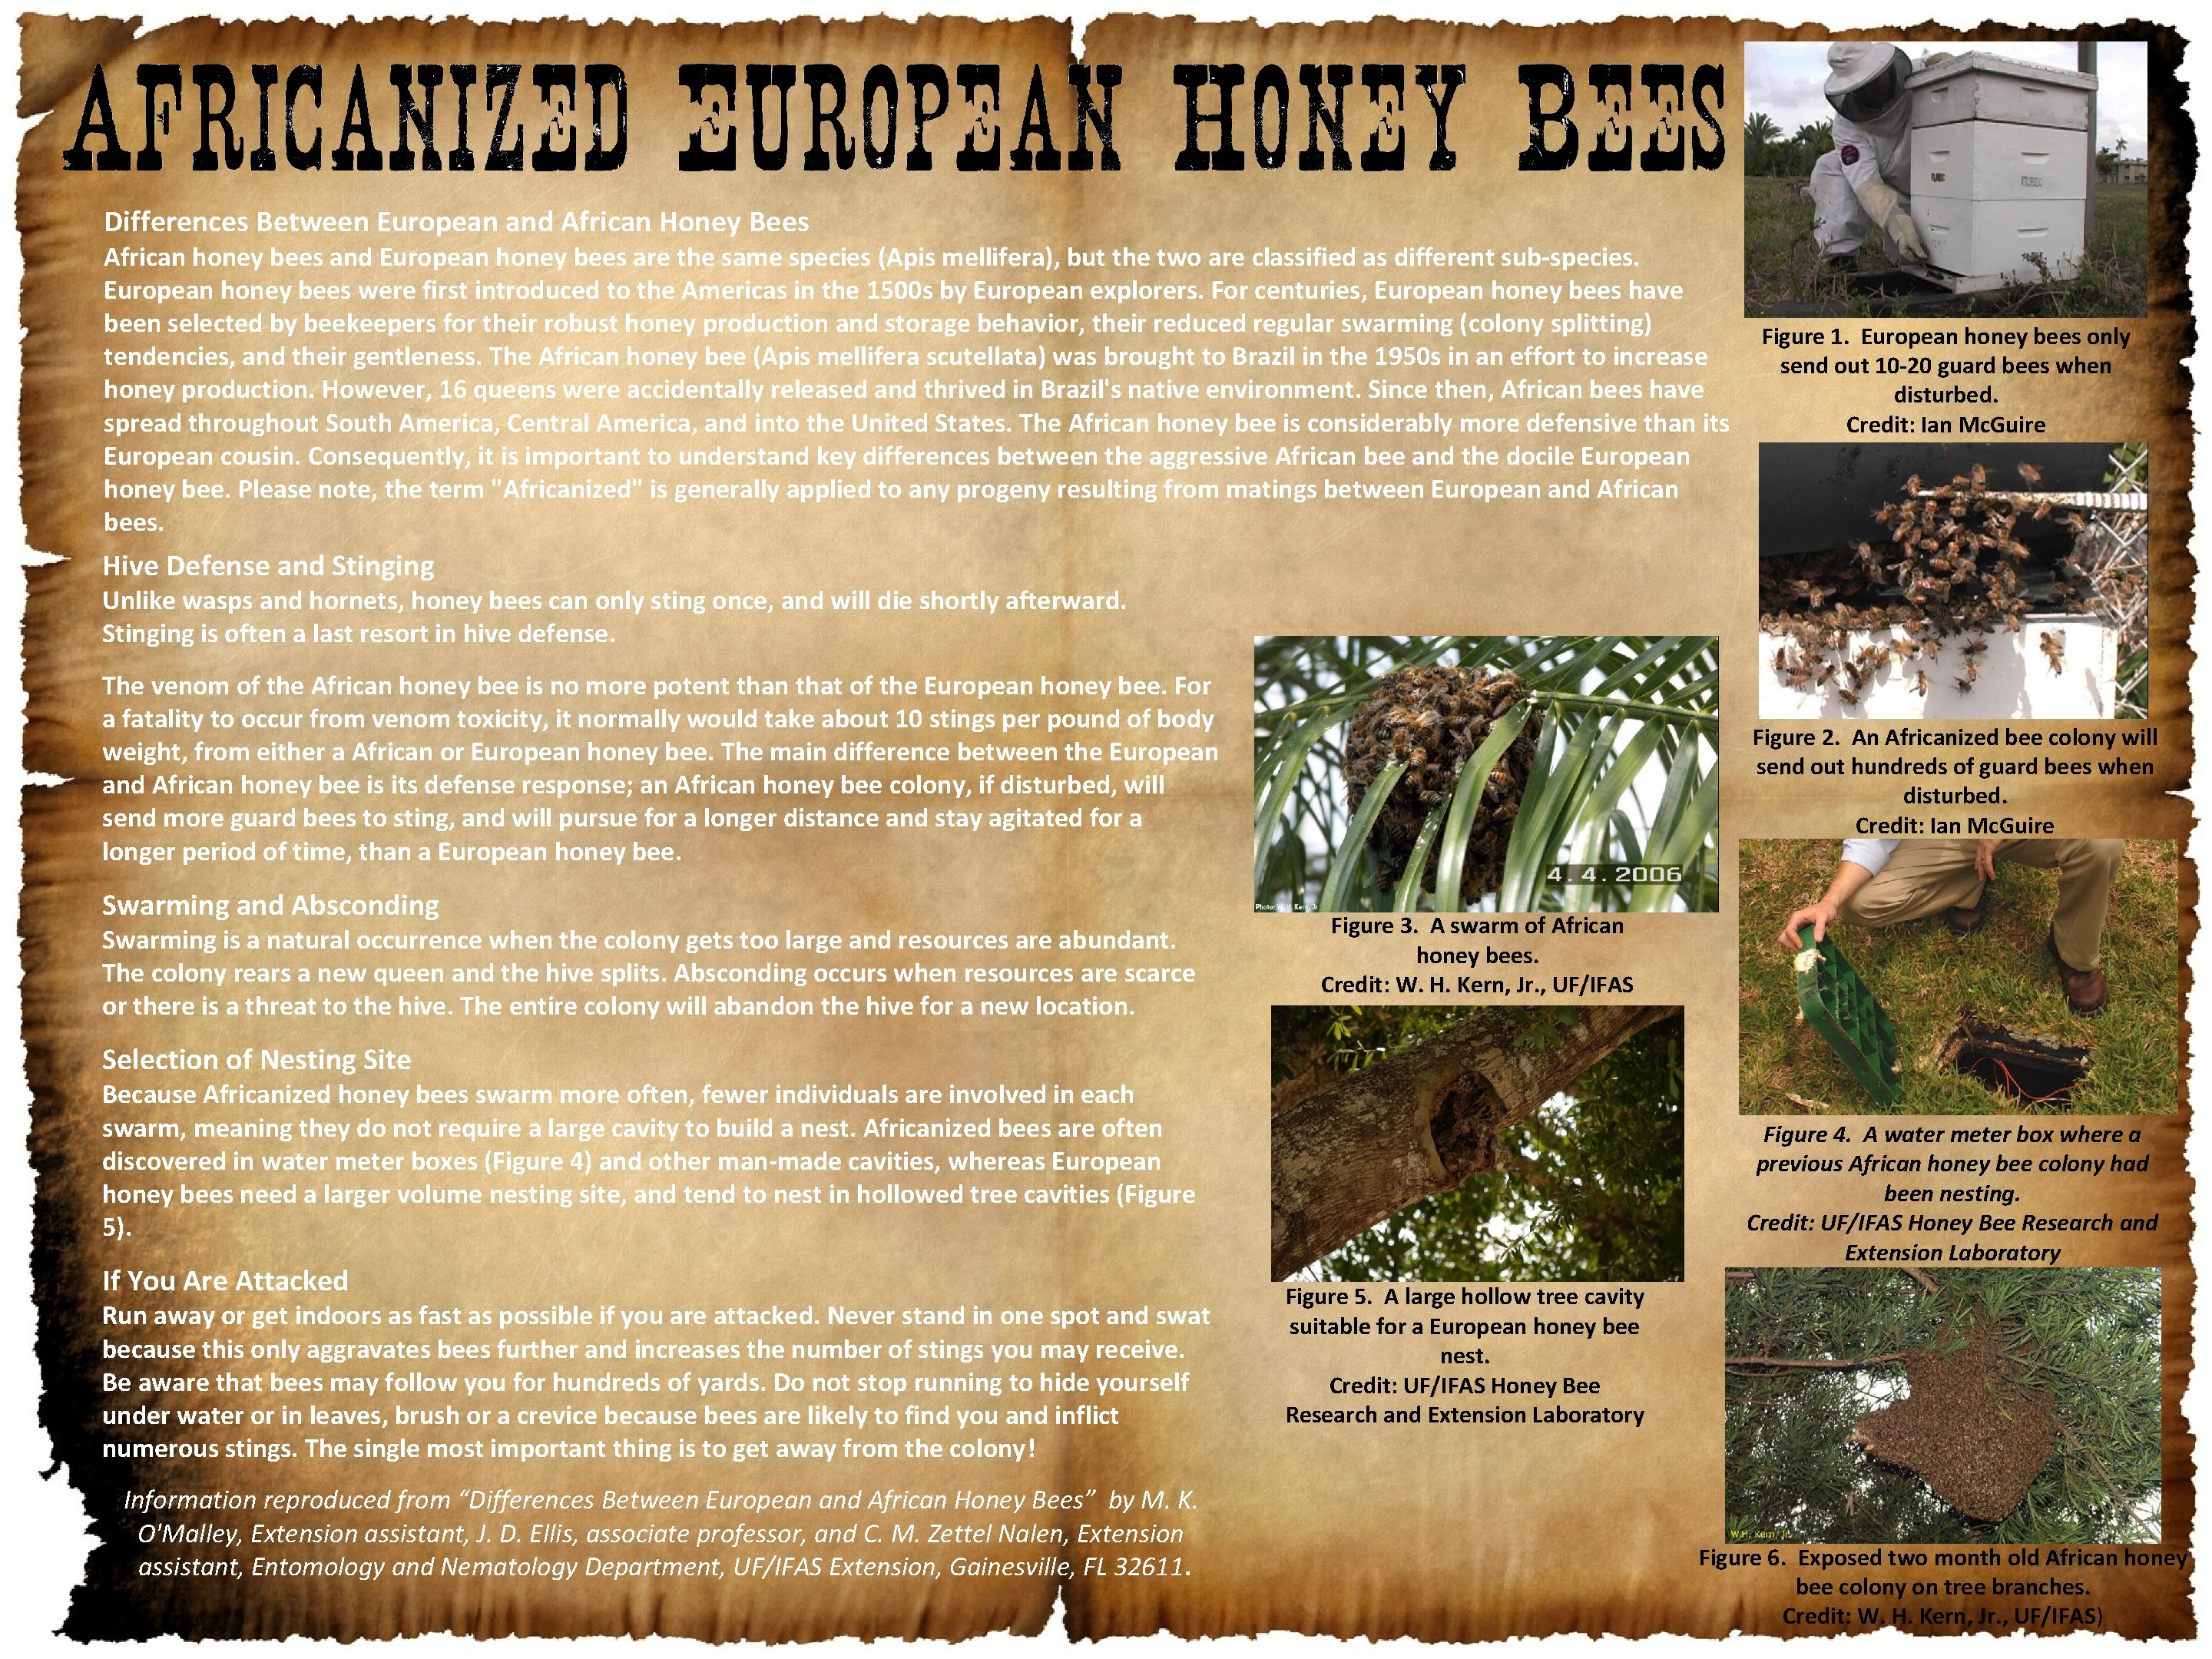 Differences Between European and African Honey Bees African honey bees and European honey bees